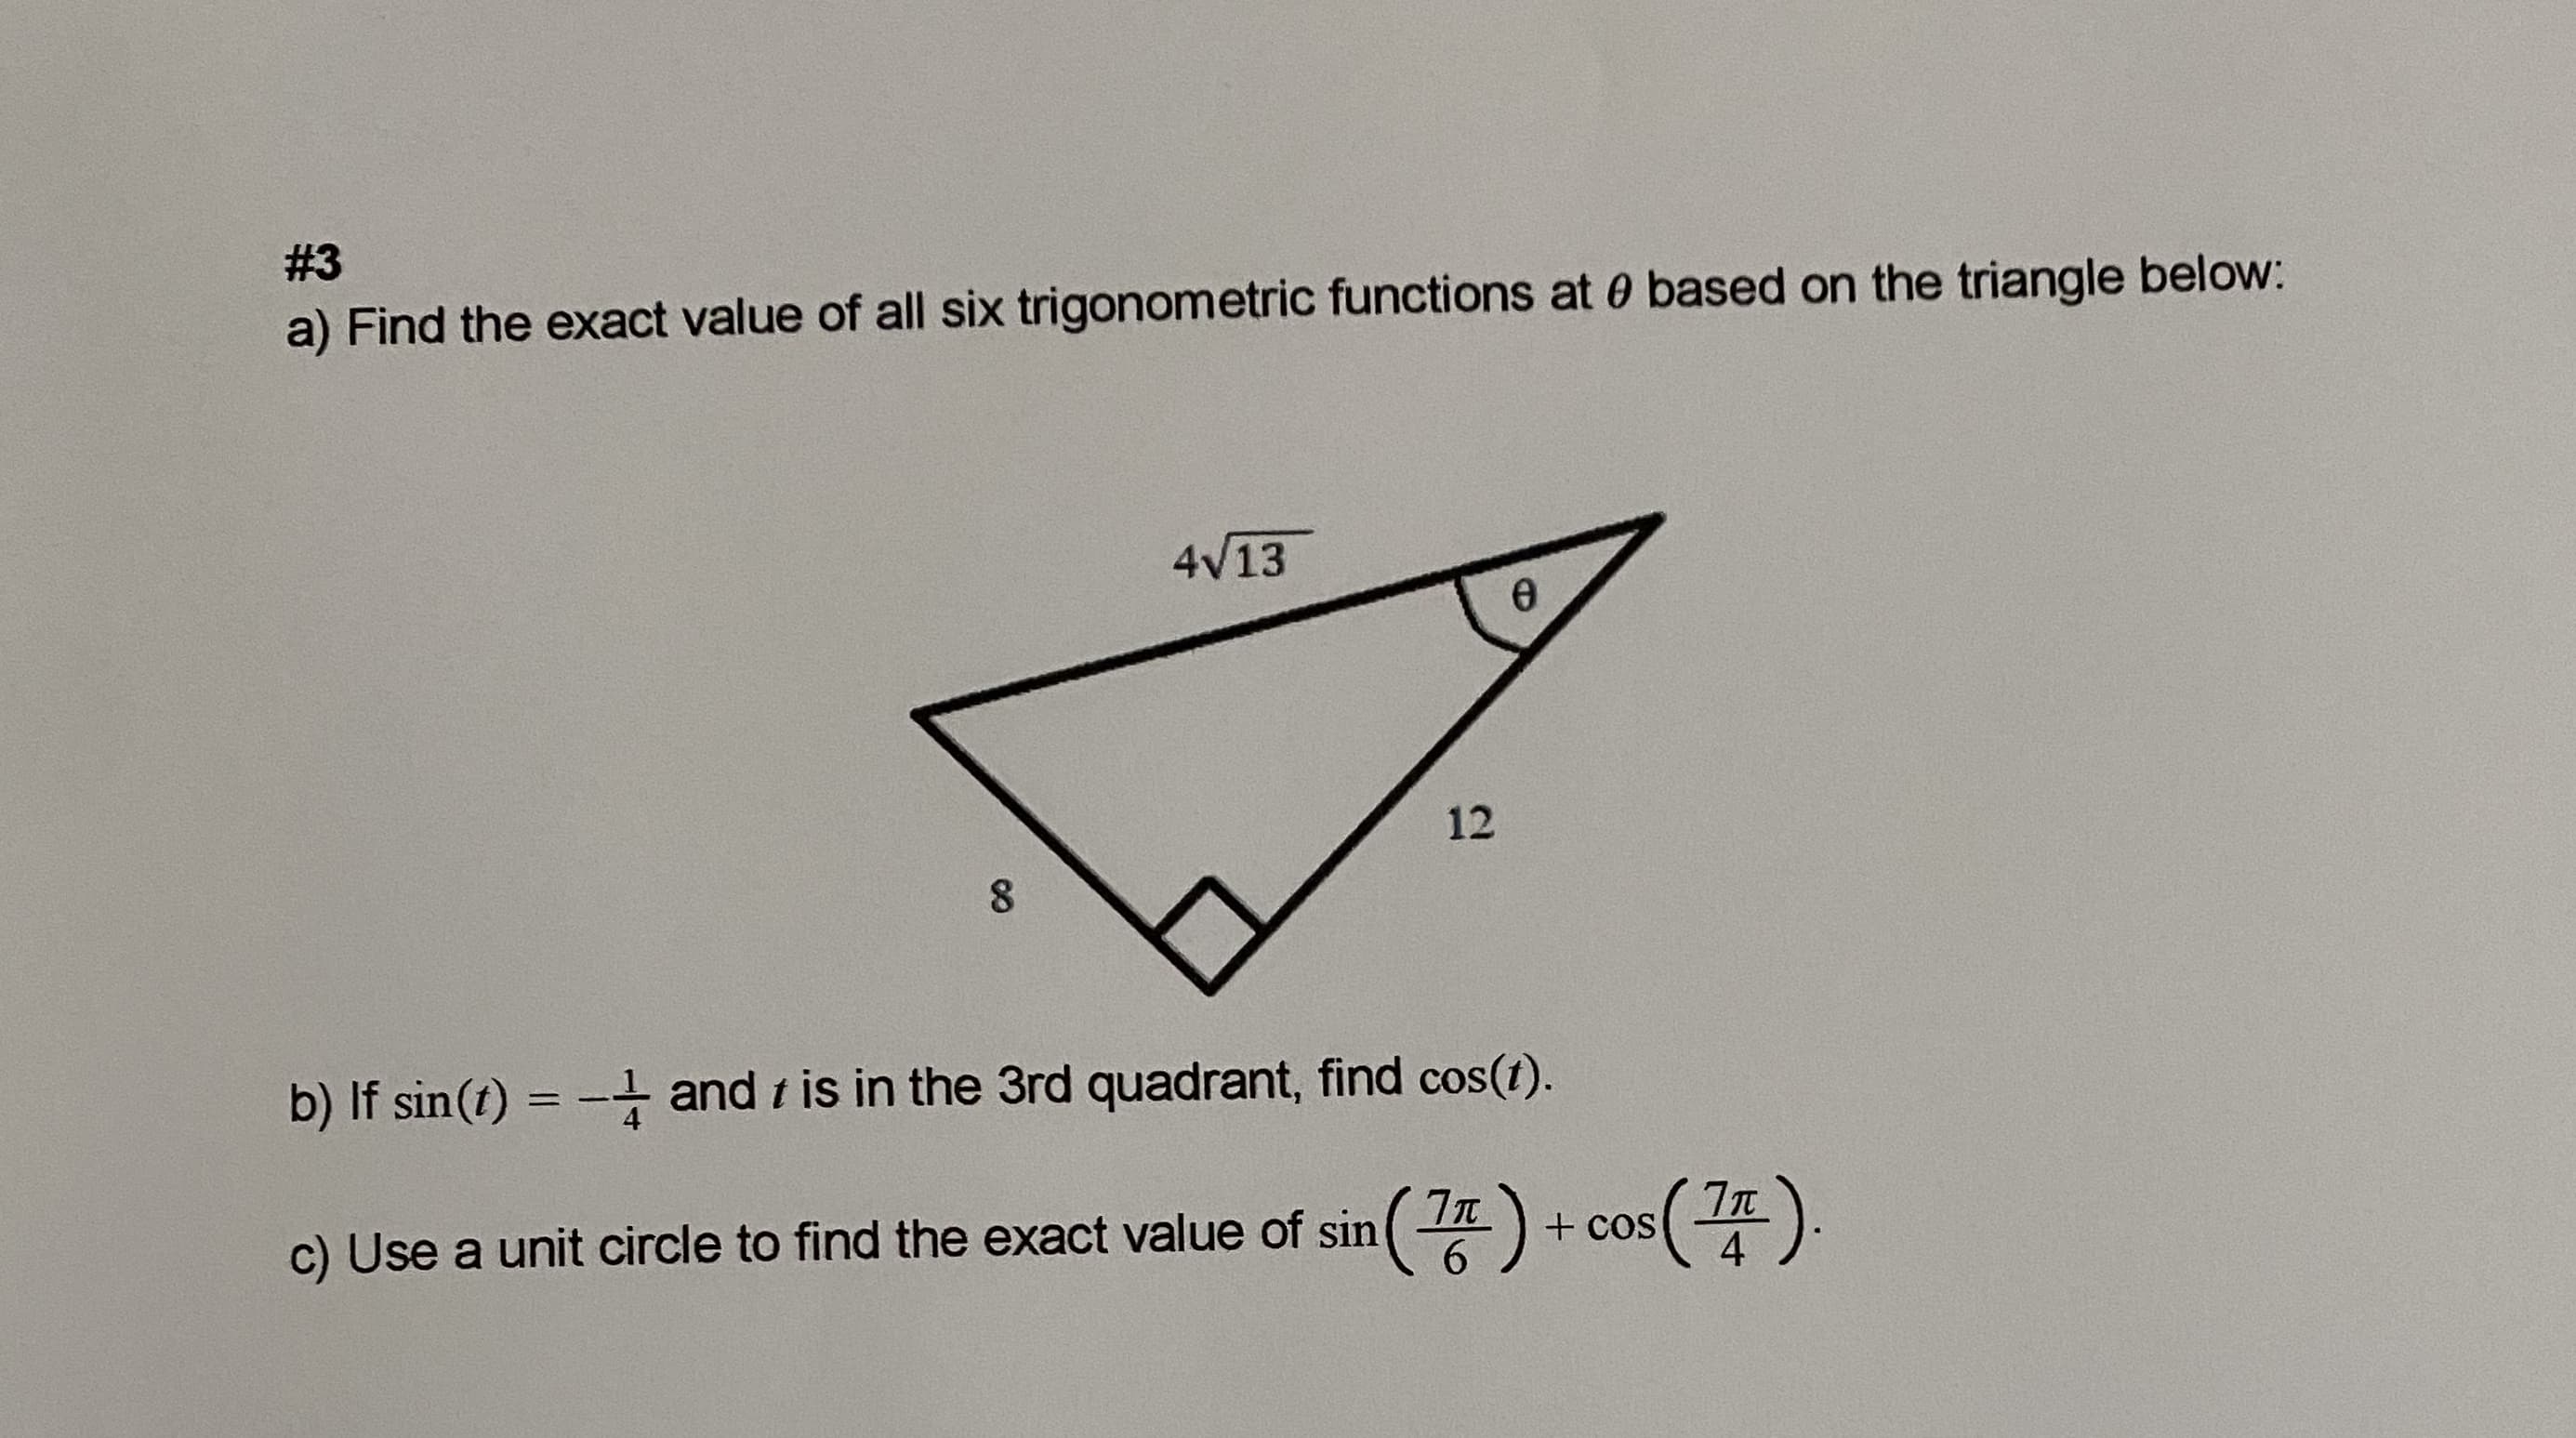 #3
a) Find the exact value of all six trigonometric functions at 0 based on the triangle below:
4V13
12
b) If sin(t) = -t and t is in the 3rd quadrant, find cos(t).
c) Use a unit circle to find the exact value of sin( )
+ cos
4
6
